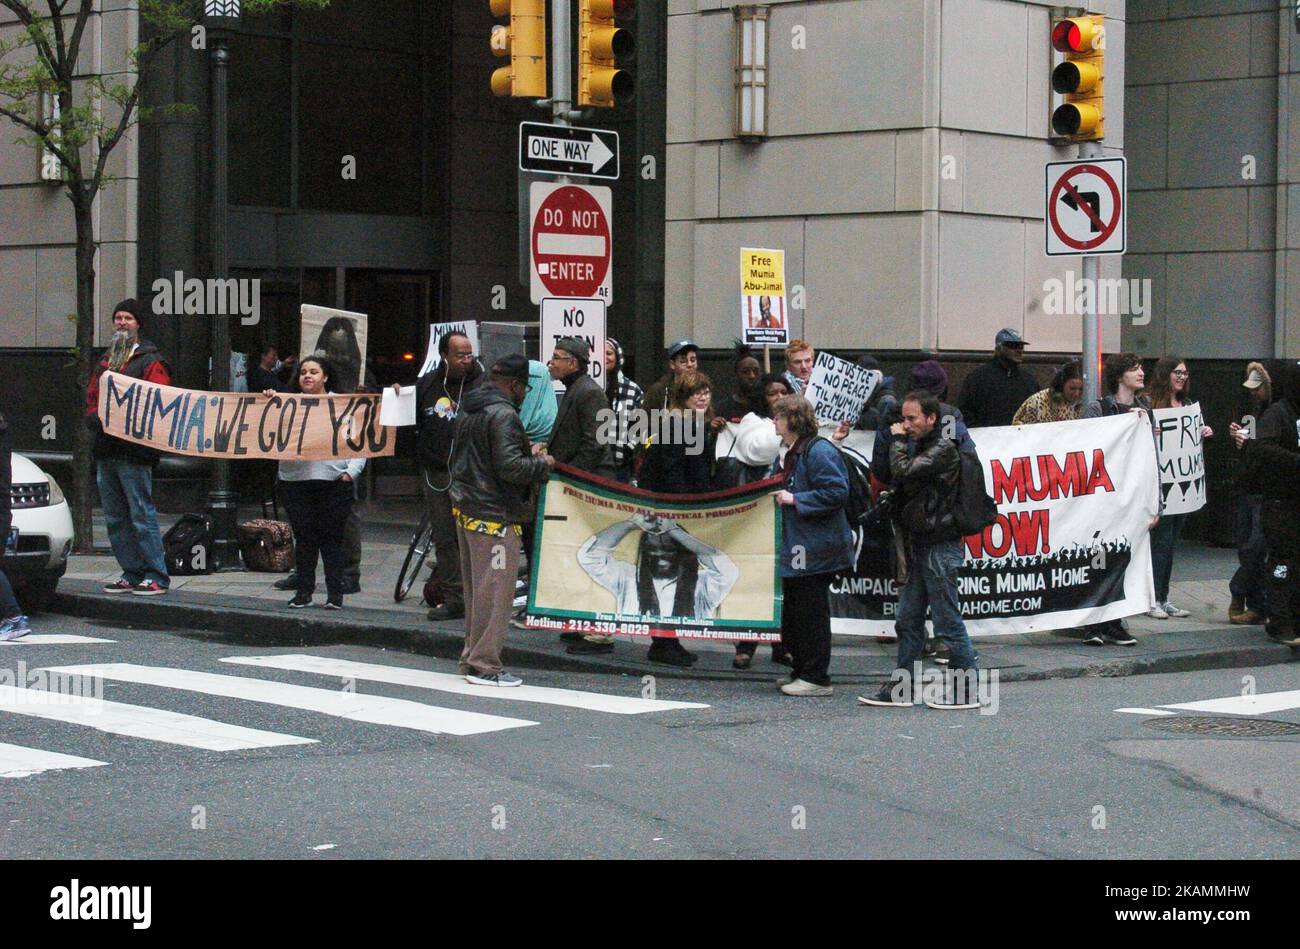 Supporters of Mumia Abu-Jamal rally outside the east entrance to the Criminal Justice Center in Philadelphia, PA on April 24, 2017. Mumia was convicted in 1981 of the murder of police officer Daniel Faulkner. His supporters around the world hold firm that the conviction was wrongful and that the prosecution both fabricated evidence and withheld exculpatory evidence in the case against Mumia. (Photo by Cory Clark/NurPhoto) *** Please Use Credit from Credit Field *** Stock Photo